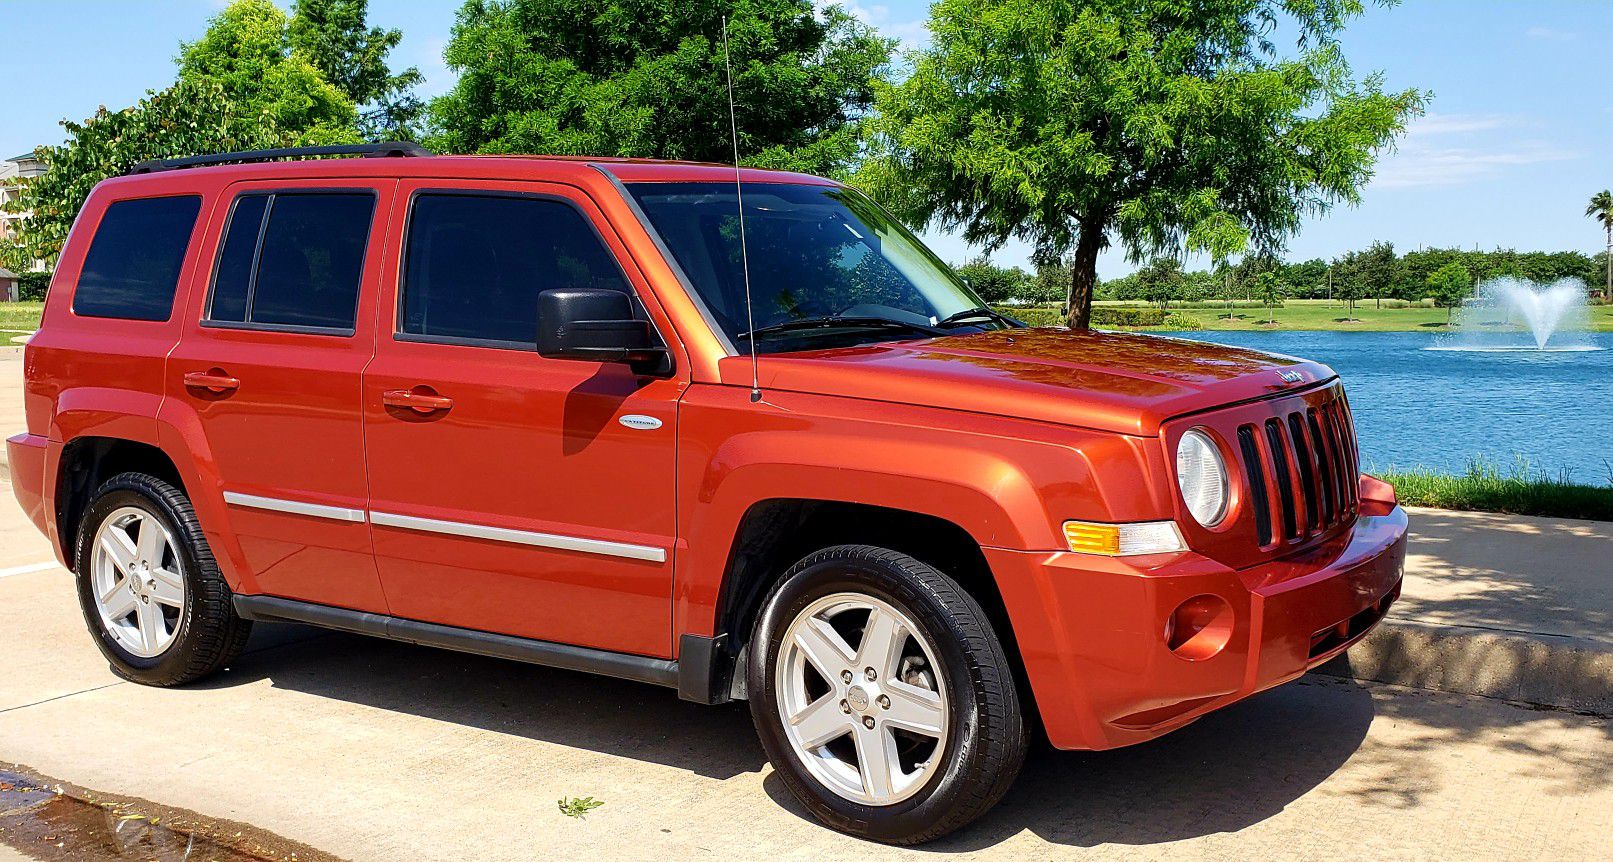 1 Owner 2010 Jeep Patriot Remote start Cold AC, heated seats,2.4 Cyl